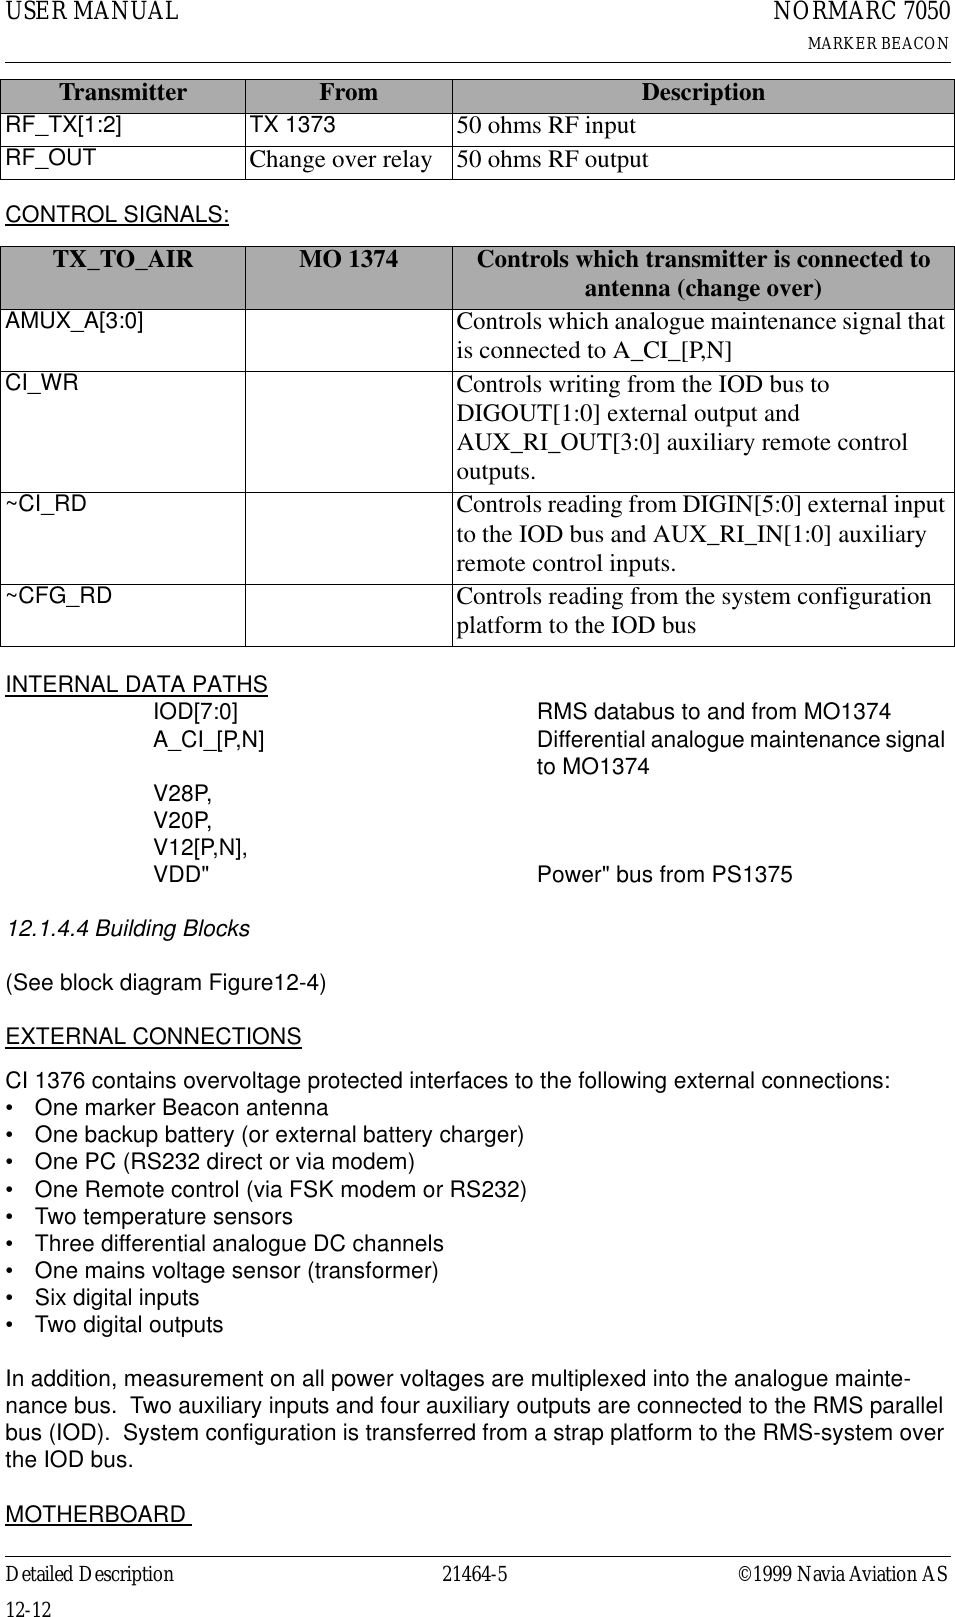 USER MANUAL12-1221464-5NORMARC 7050MARKER BEACONDetailed Description ©1999 Navia Aviation ASCONTROL SIGNALS:INTERNAL DATA PATHSIOD[7:0] RMS databus to and from MO1374A_CI_[P,N] Differential analogue maintenance signal to MO1374V28P, V20P,V12[P,N],VDD&quot; Power&quot; bus from PS137512.1.4.4 Building Blocks  (See block diagram Figure12-4)EXTERNAL CONNECTIONSCI 1376 contains overvoltage protected interfaces to the following external connections:• One marker Beacon antenna• One backup battery (or external battery charger)• One PC (RS232 direct or via modem)• One Remote control (via FSK modem or RS232)• Two temperature sensors• Three differential analogue DC channels• One mains voltage sensor (transformer)• Six digital inputs• Two digital outputsIn addition, measurement on all power voltages are multiplexed into the analogue mainte-nance bus.  Two auxiliary inputs and four auxiliary outputs are connected to the RMS parallel bus (IOD).  System configuration is transferred from a strap platform to the RMS-system over the IOD bus.MOTHERBOARD Transmitter From DescriptionRF_TX[1:2] TX 1373 50 ohms RF inputRF_OUT Change over relay 50 ohms RF outputTX_TO_AIR MO 1374 Controls which transmitter is connected to antenna (change over)AMUX_A[3:0] Controls which analogue maintenance signal that is connected to A_CI_[P,N]CI_WR Controls writing from the IOD bus to DIGOUT[1:0] external output and AUX_RI_OUT[3:0] auxiliary remote control outputs.~CI_RD Controls reading from DIGIN[5:0] external input to the IOD bus and AUX_RI_IN[1:0] auxiliary remote control inputs.~CFG_RD Controls reading from the system configuration platform to the IOD bus